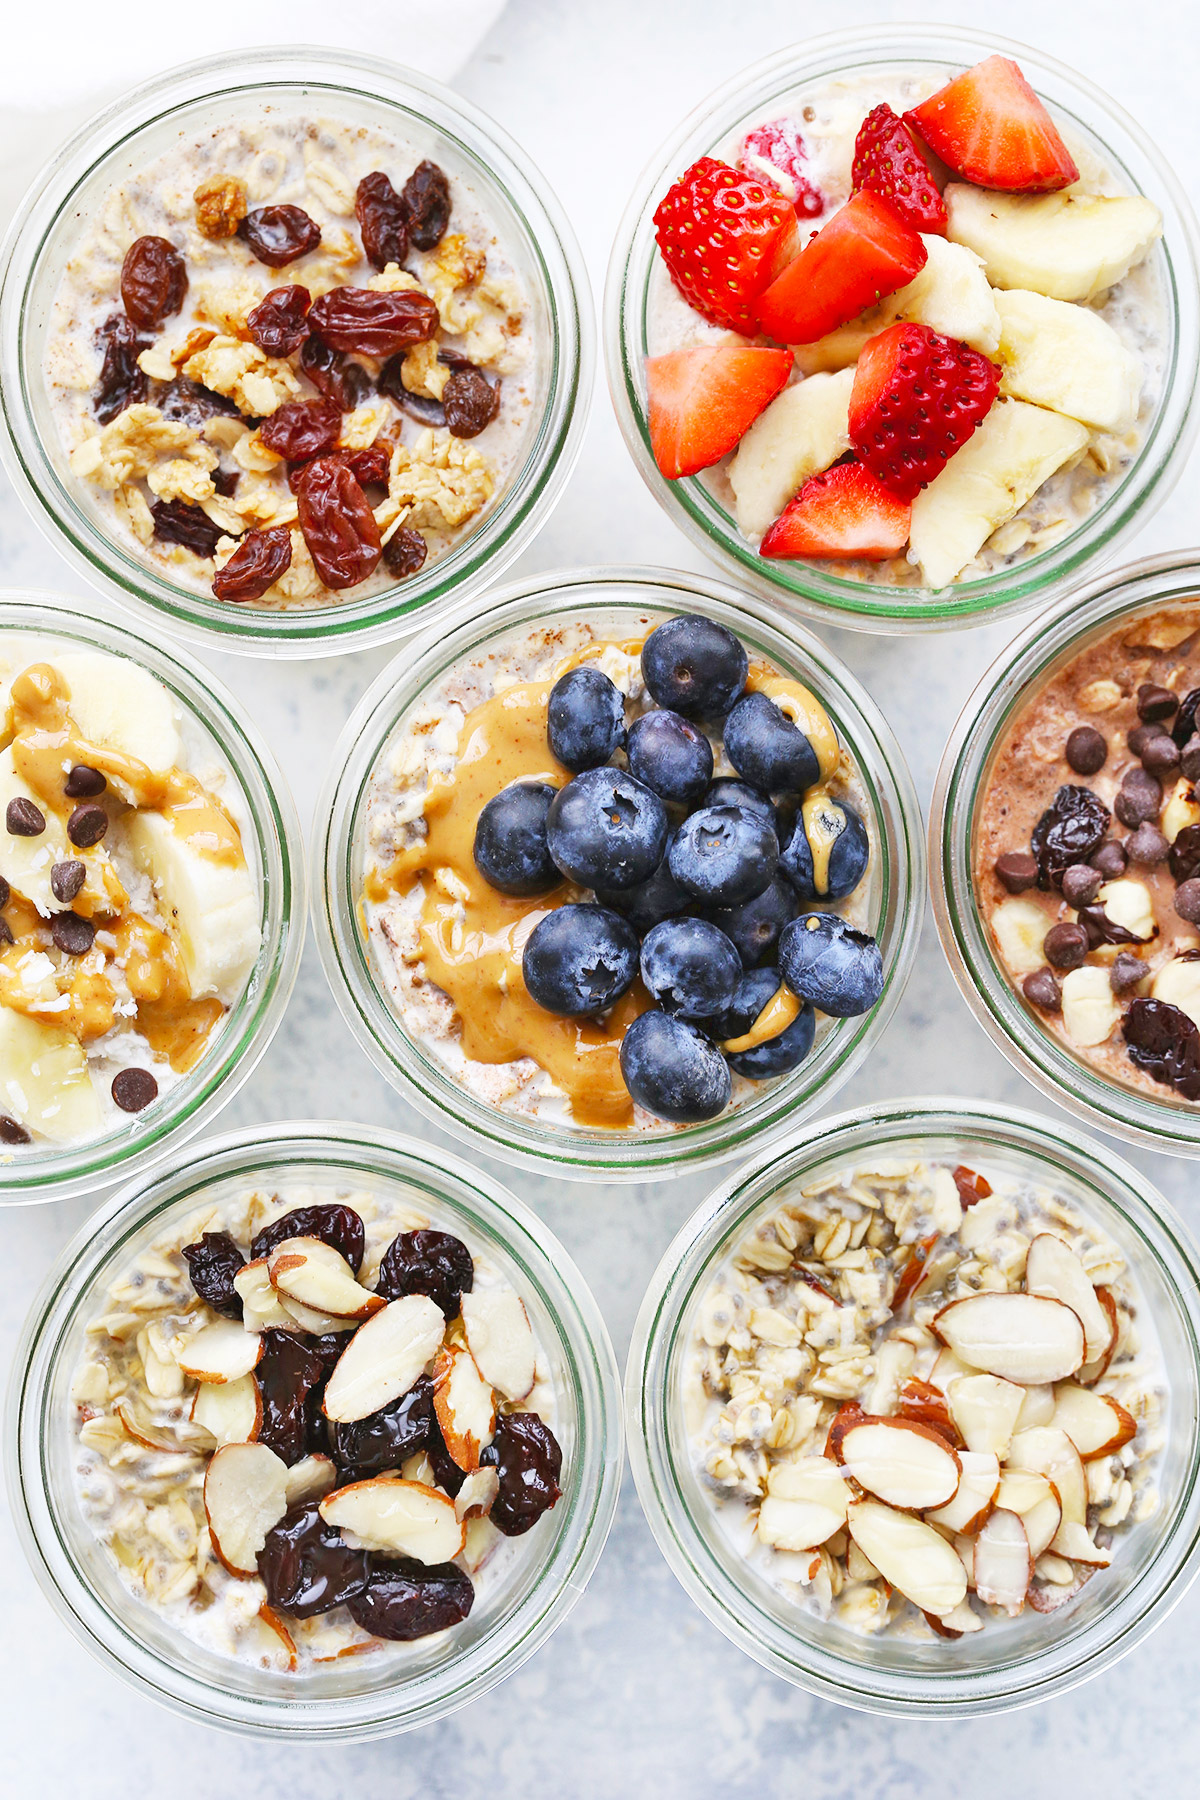 How to Make Overnight Oats + 10 Flavors to Try